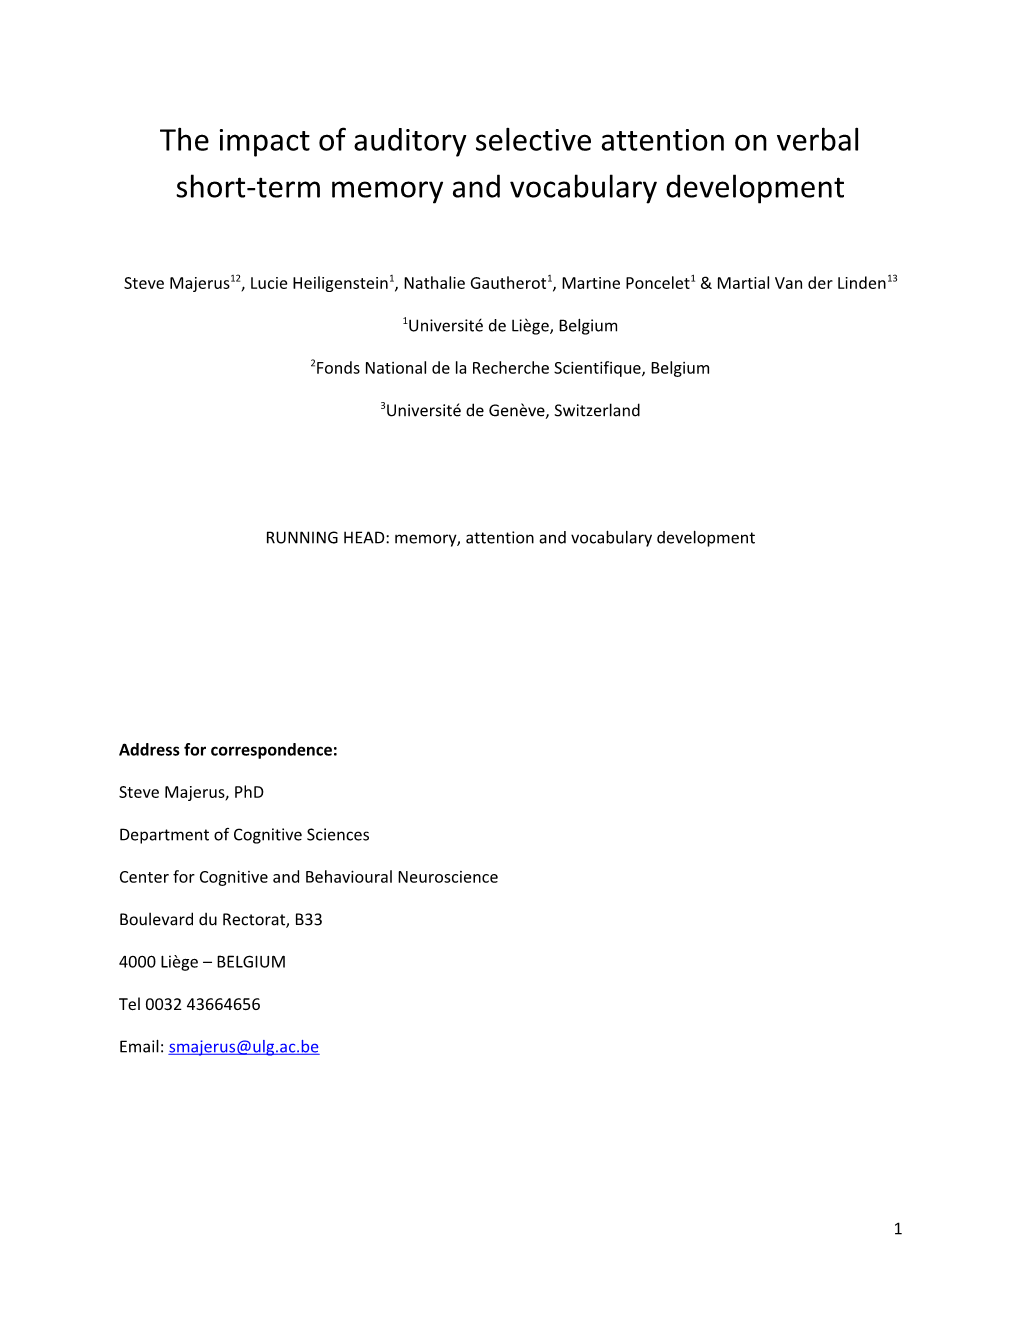 The Impact of Auditory Selective Attention on Verbal Short-Term Memory and Vocabulary